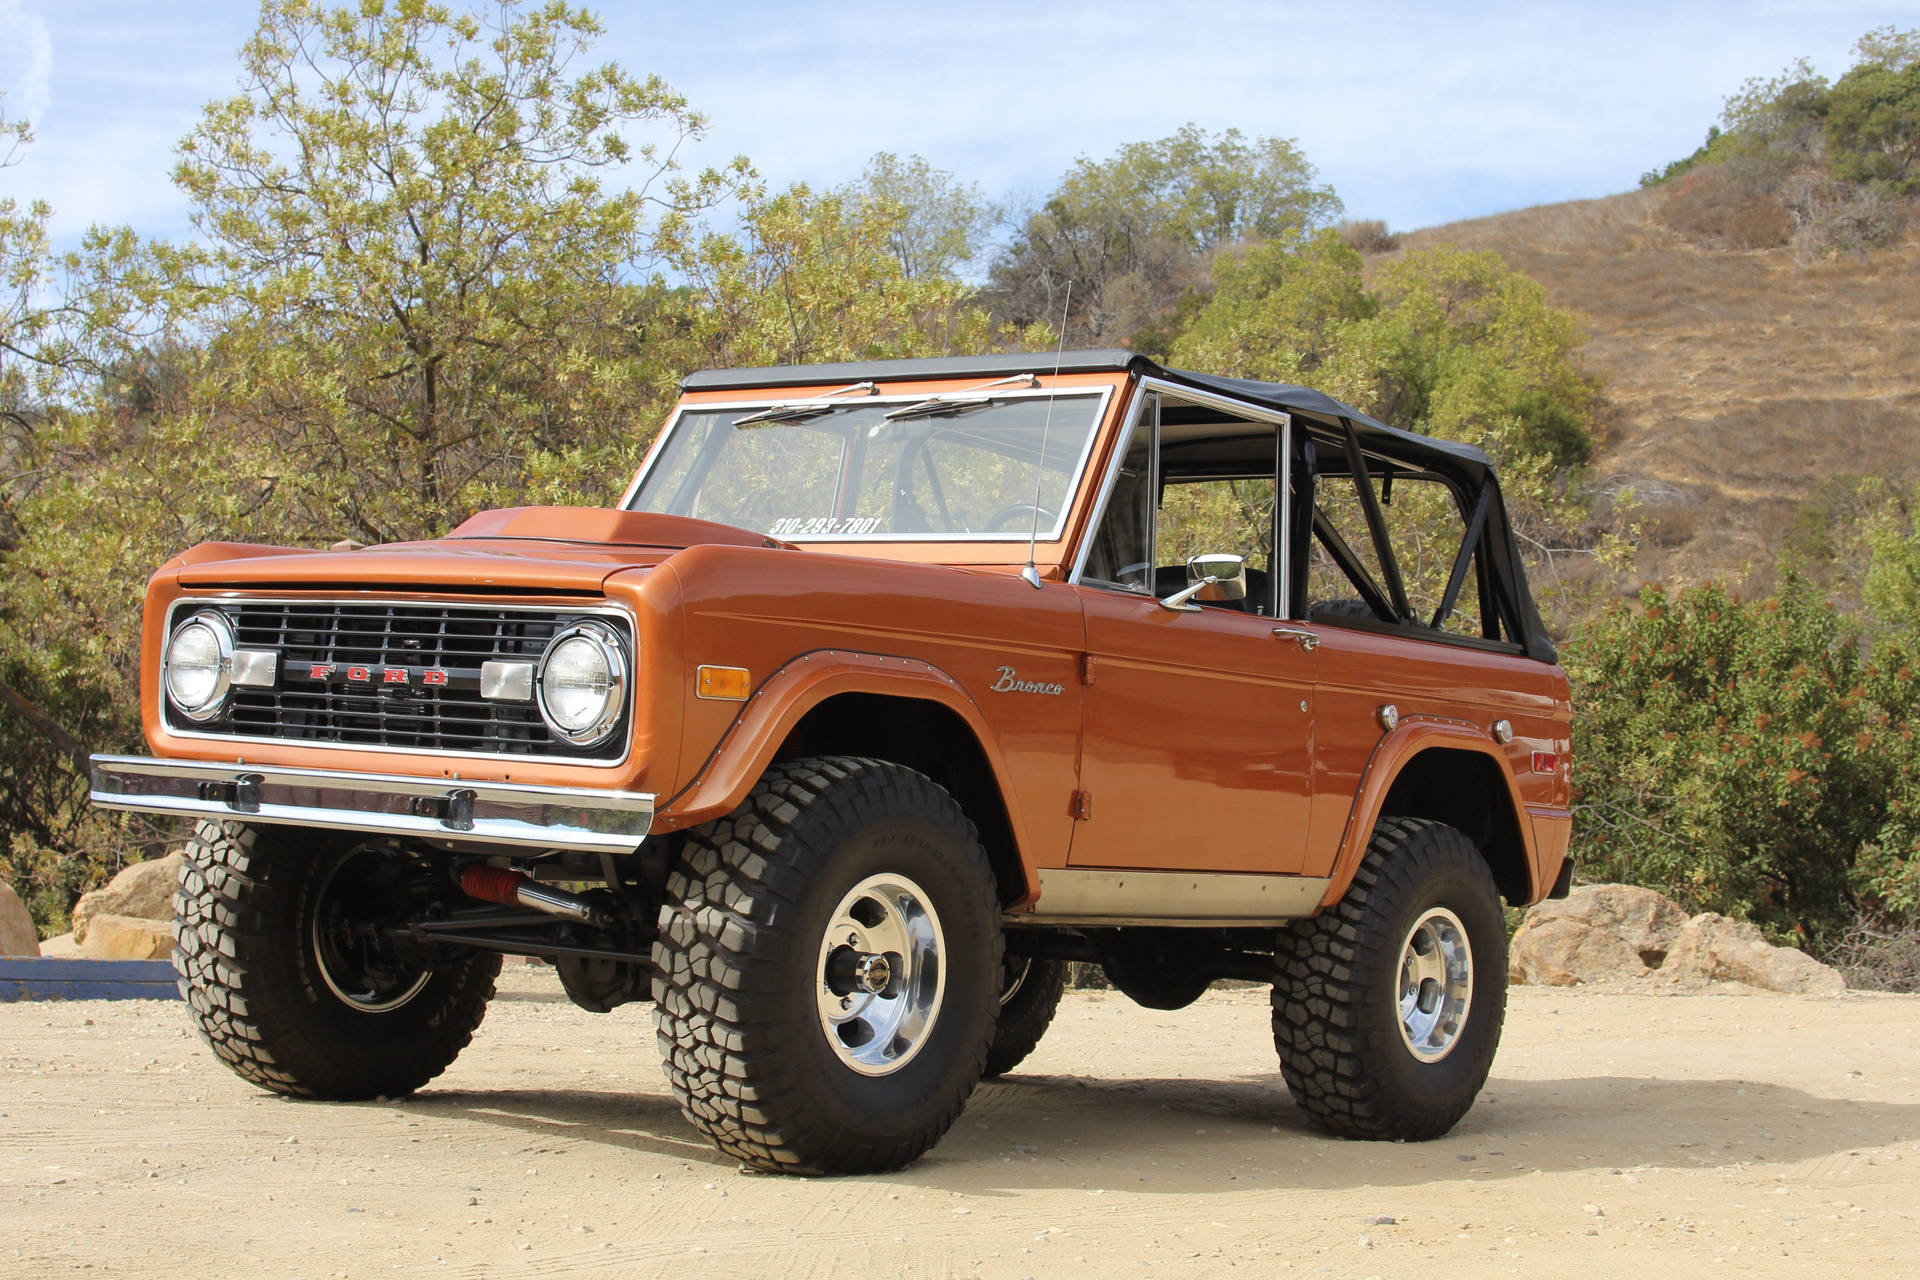 Ford Bronco Parked In Dirt Road Background